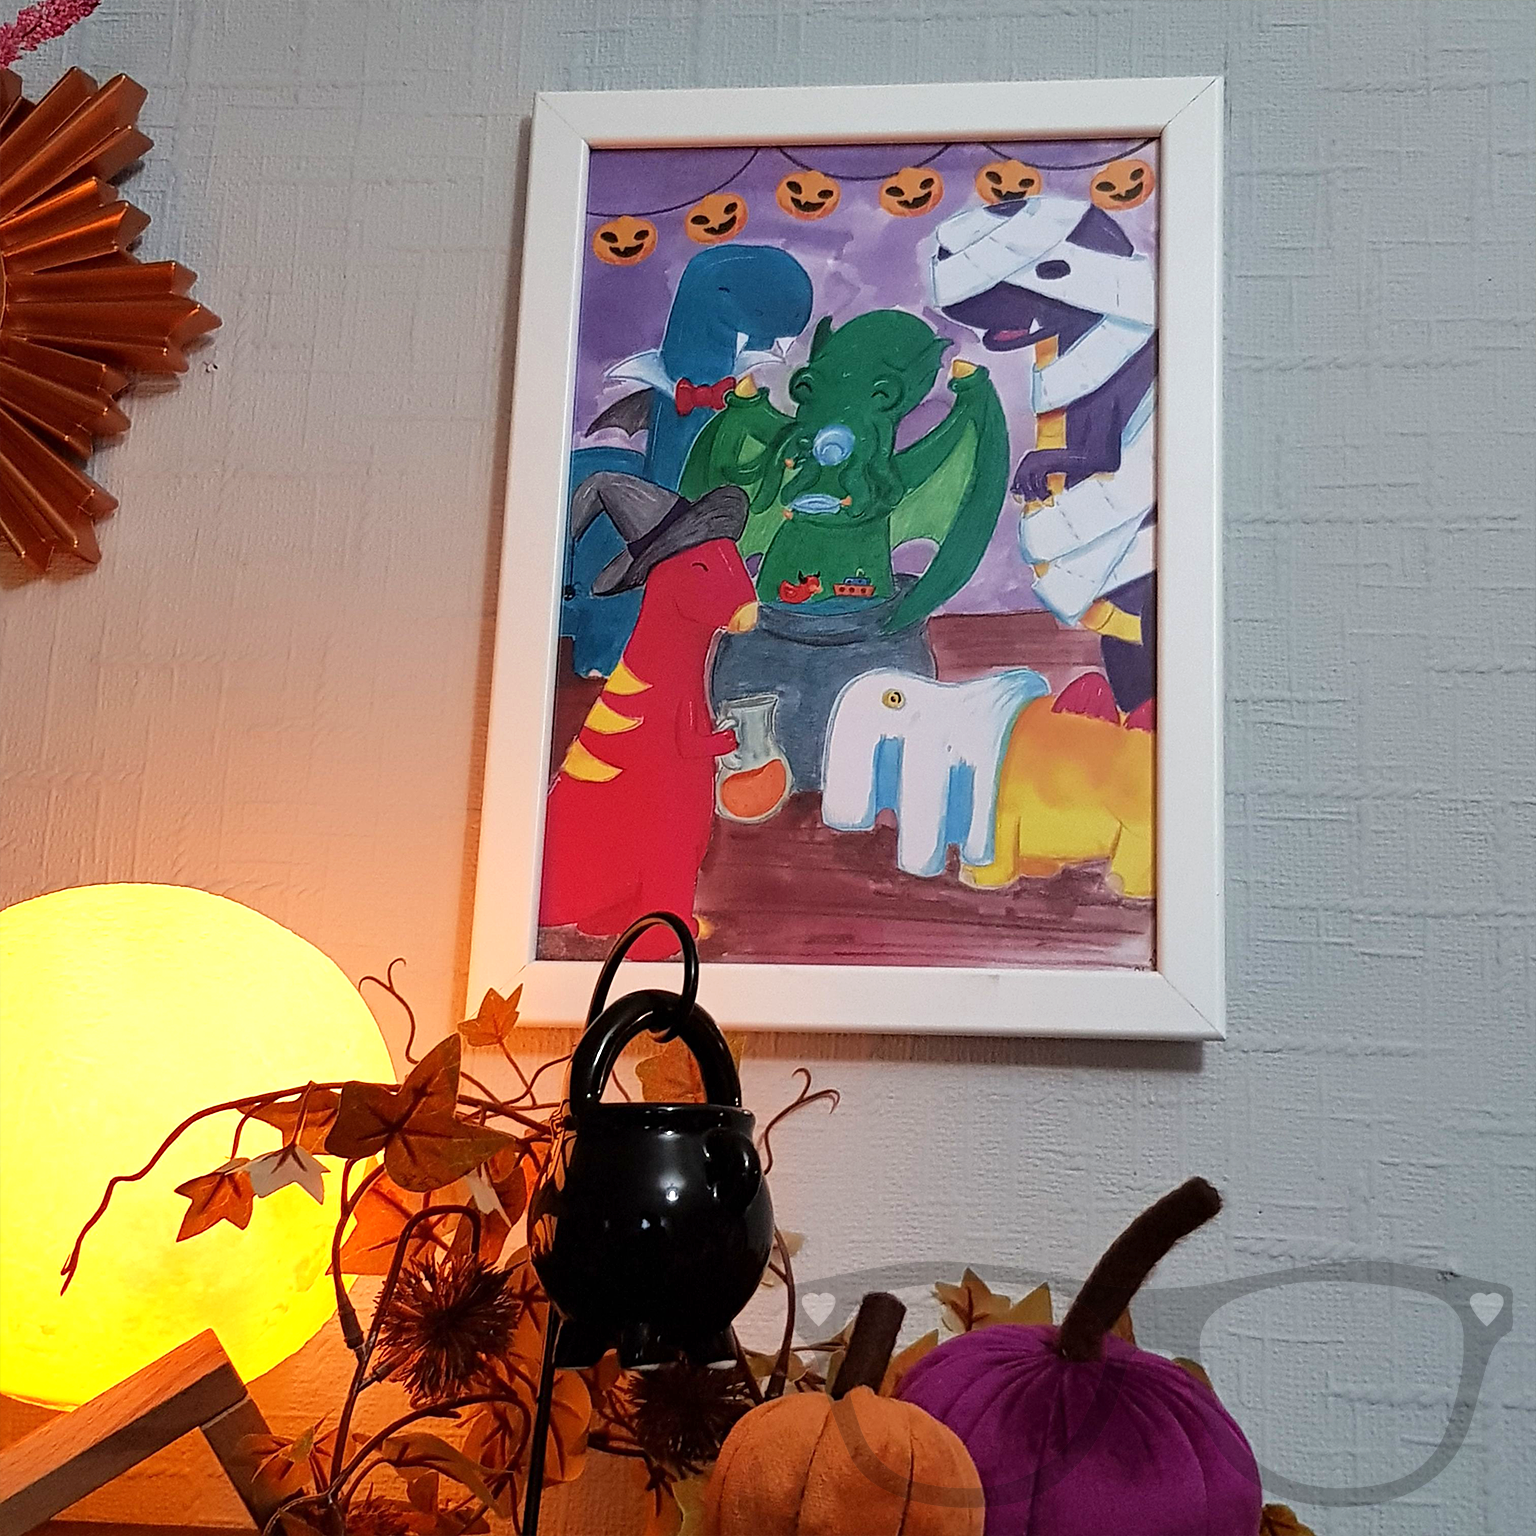 Dinosaur Halloween A4 Art print in a frame on the wall. A digital art print ideal for displaying in offices, nurseries or bedrooms.